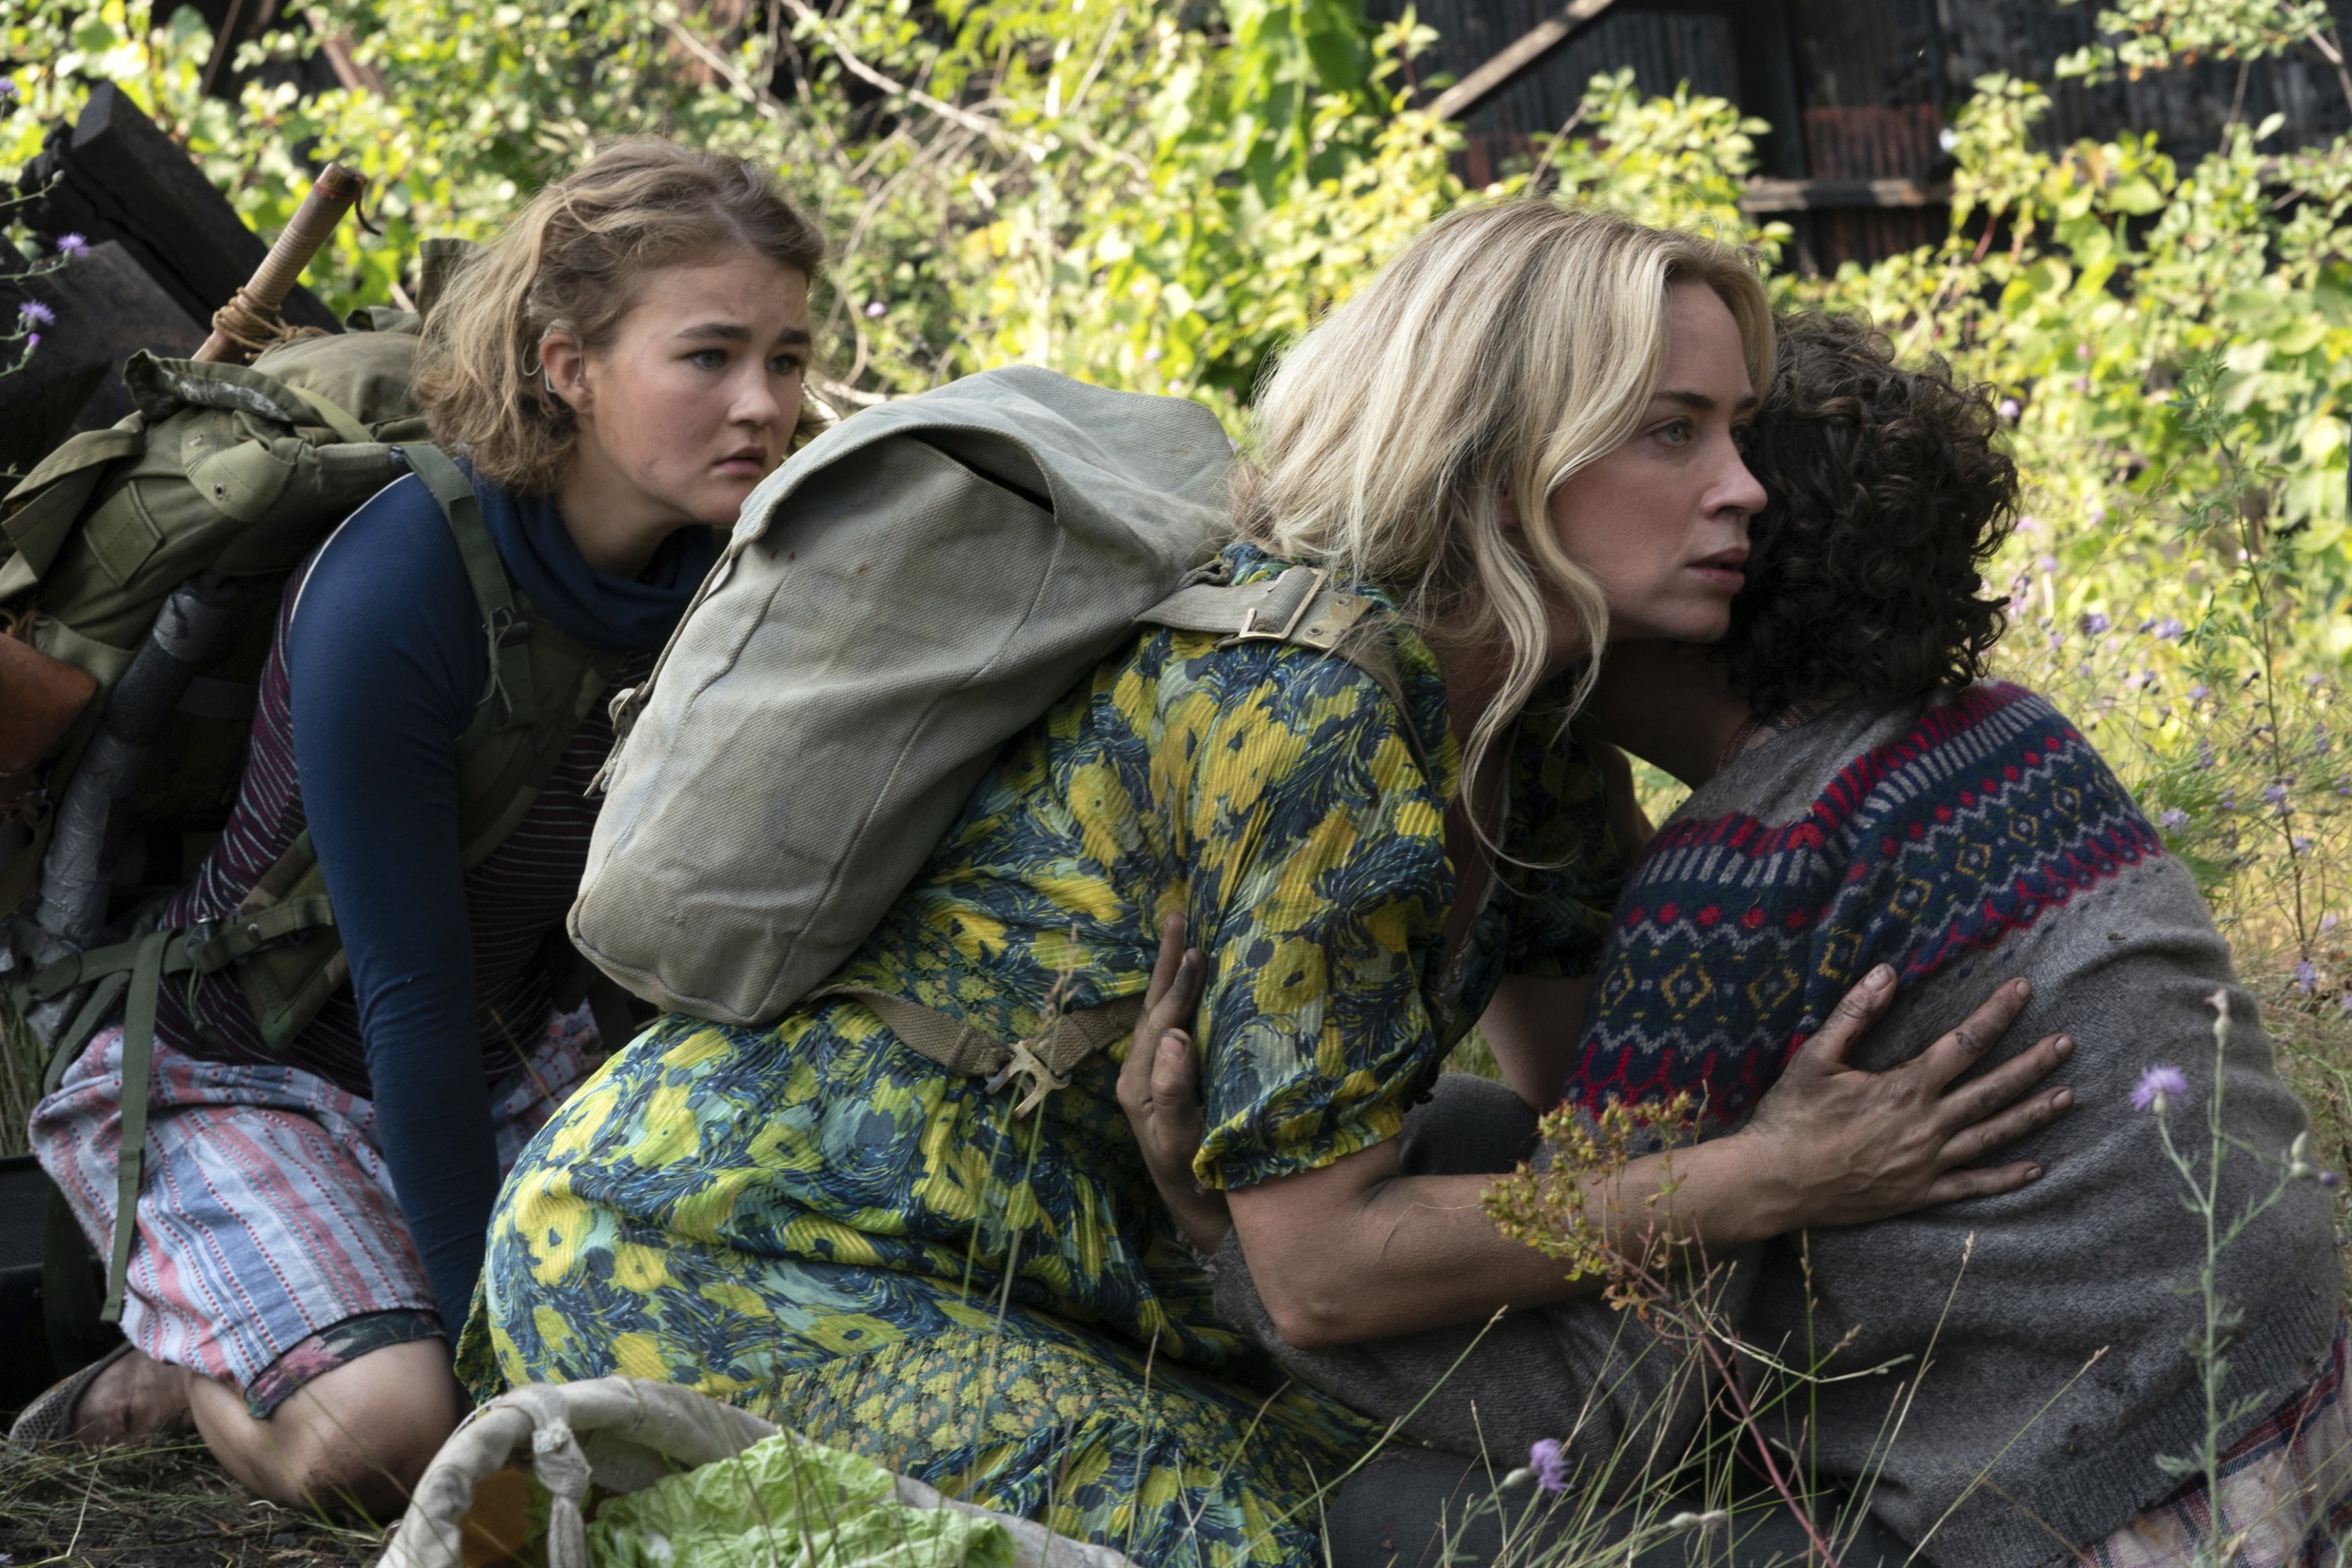 Emily Blunt (C) hugs her on-screen son Noah Jupe (R) as Millicent Simmonds watches on, in a scene from 'A Quiet Place Part II.' (Paramount Pictures via AP)